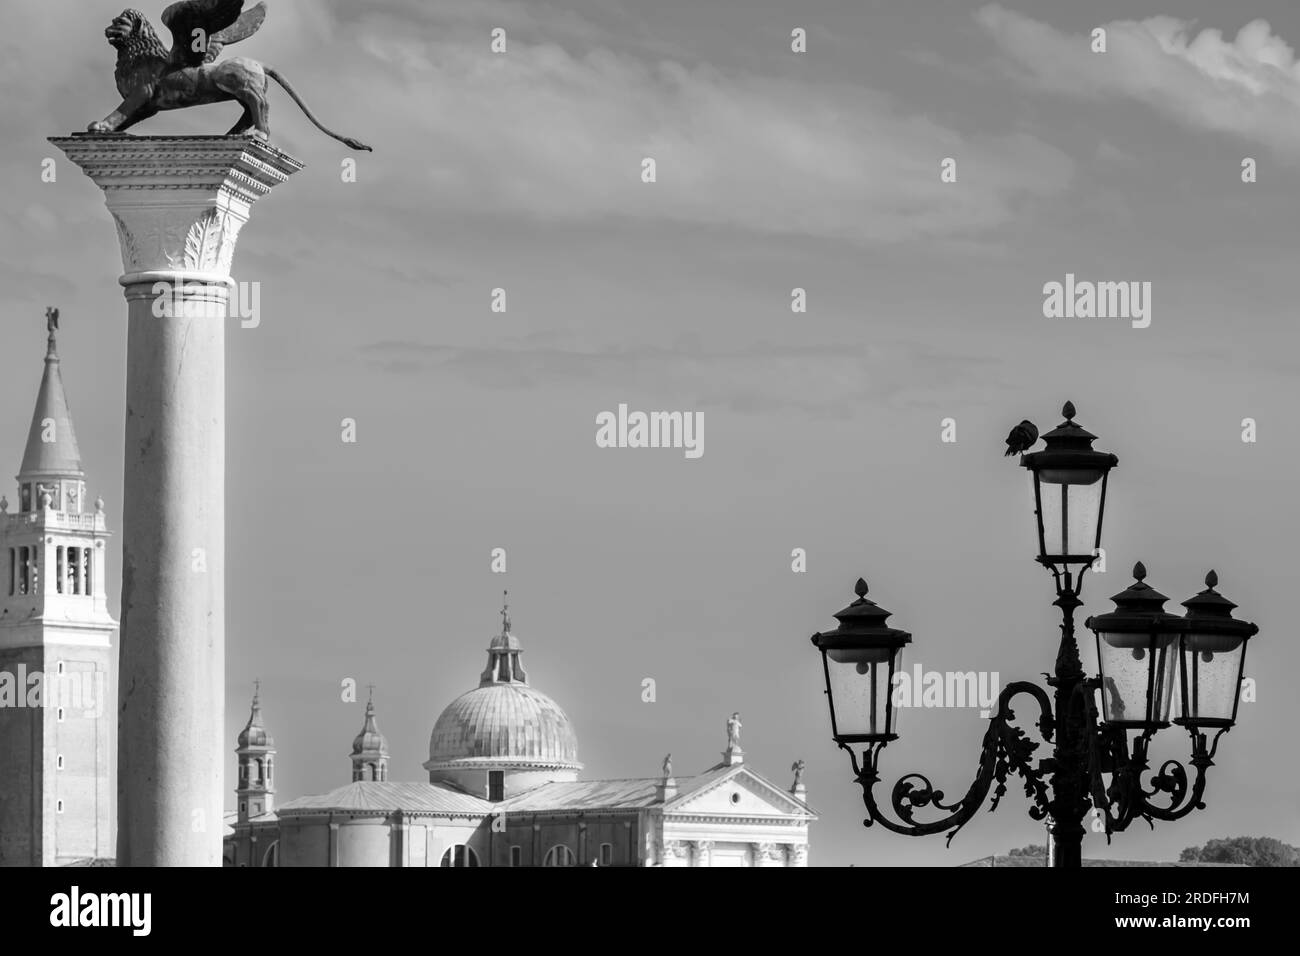 Venice,  Italy - April 27, 2019 : Beautiful Venice Italy with its lanterns, churches, tower bells and statues Stock Photo